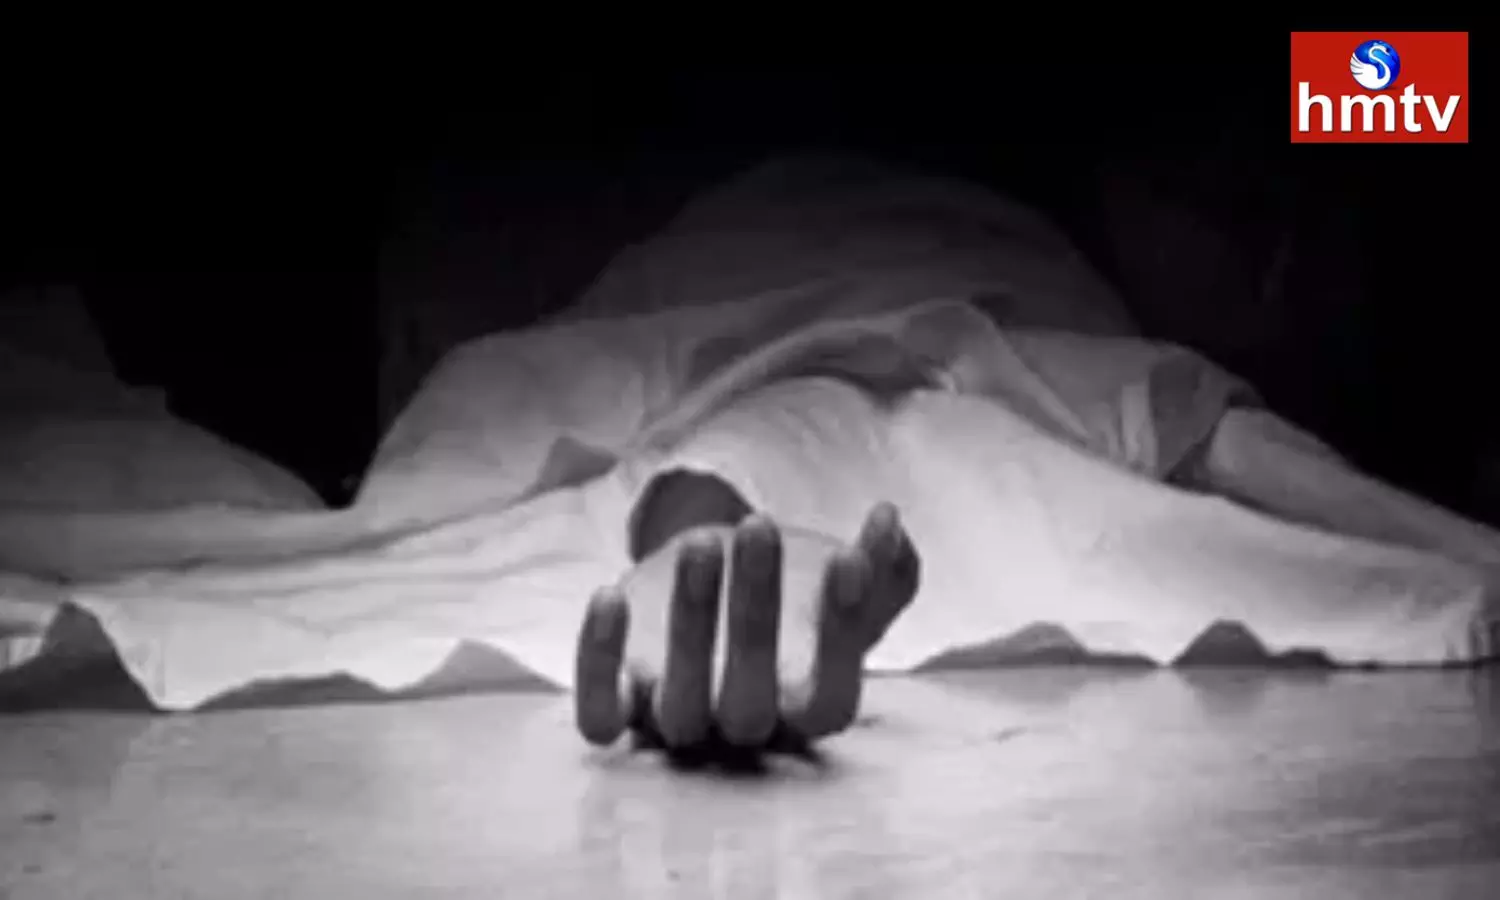 Man Commits Suicide In Visakhapatnam Unable To Cope With Pressure From Loan App